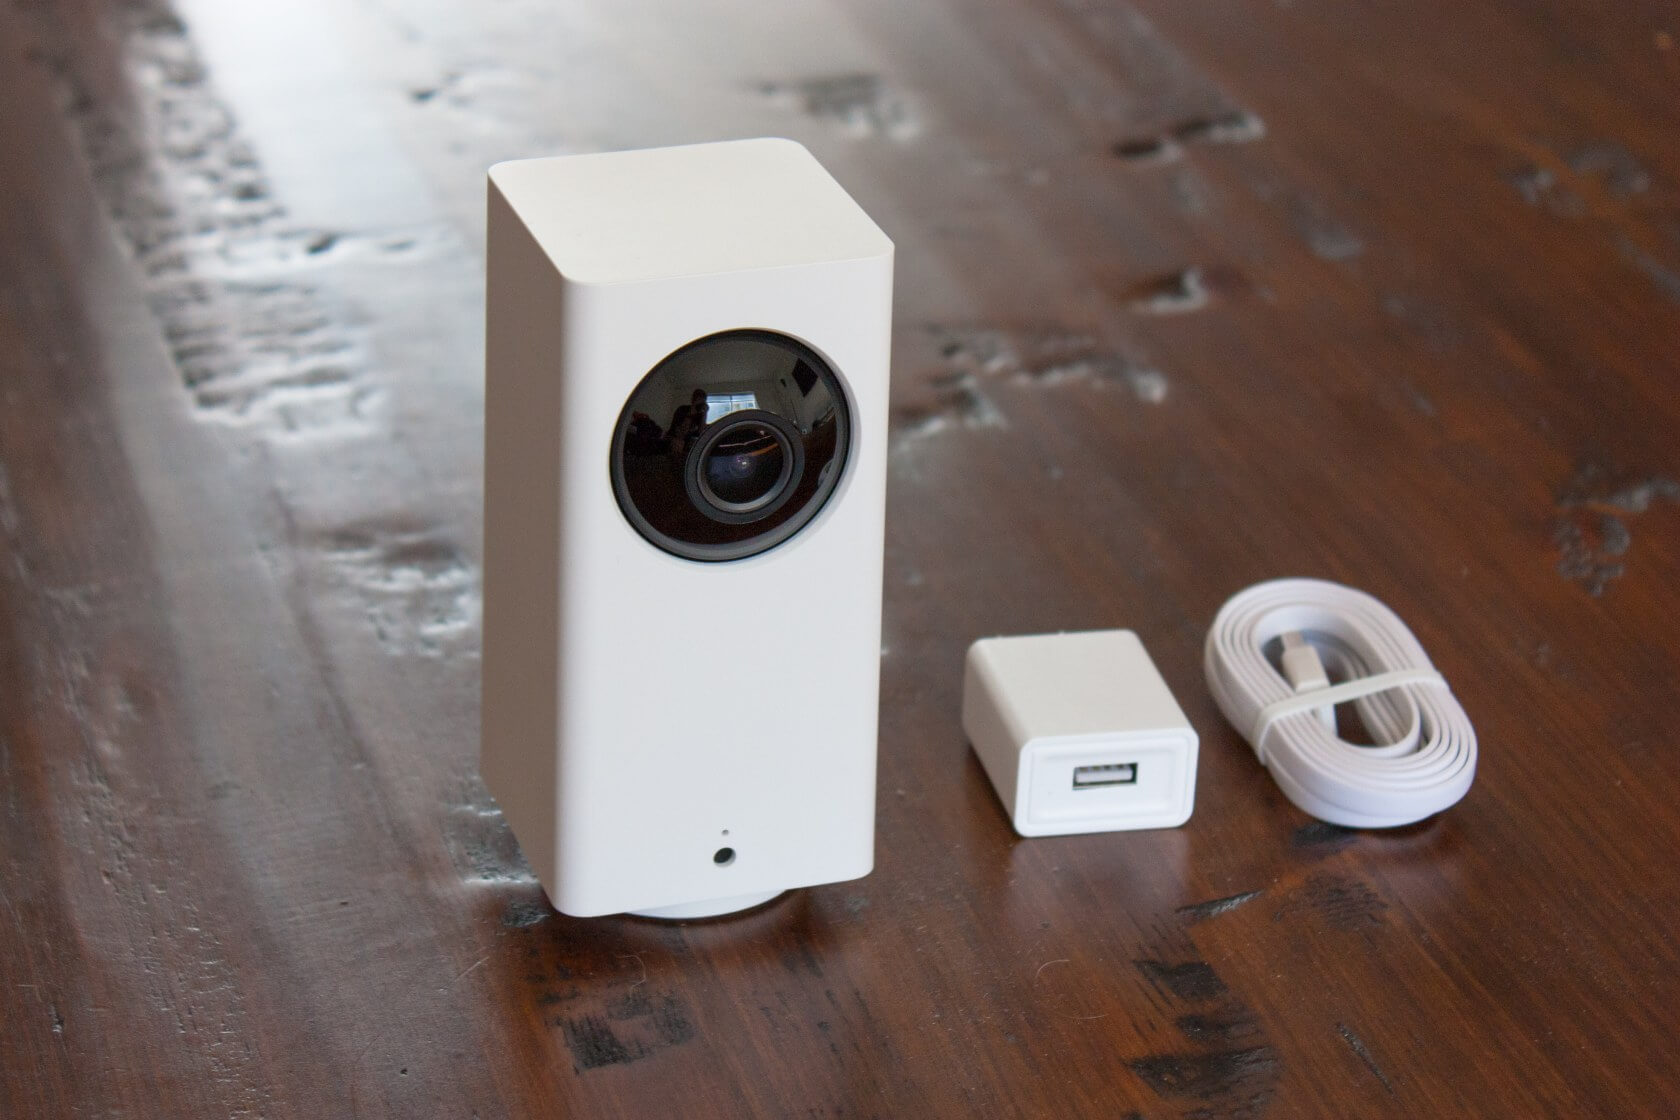 IoT maker Wyze suffers data leak, exposes personal data of 2.4 million customers